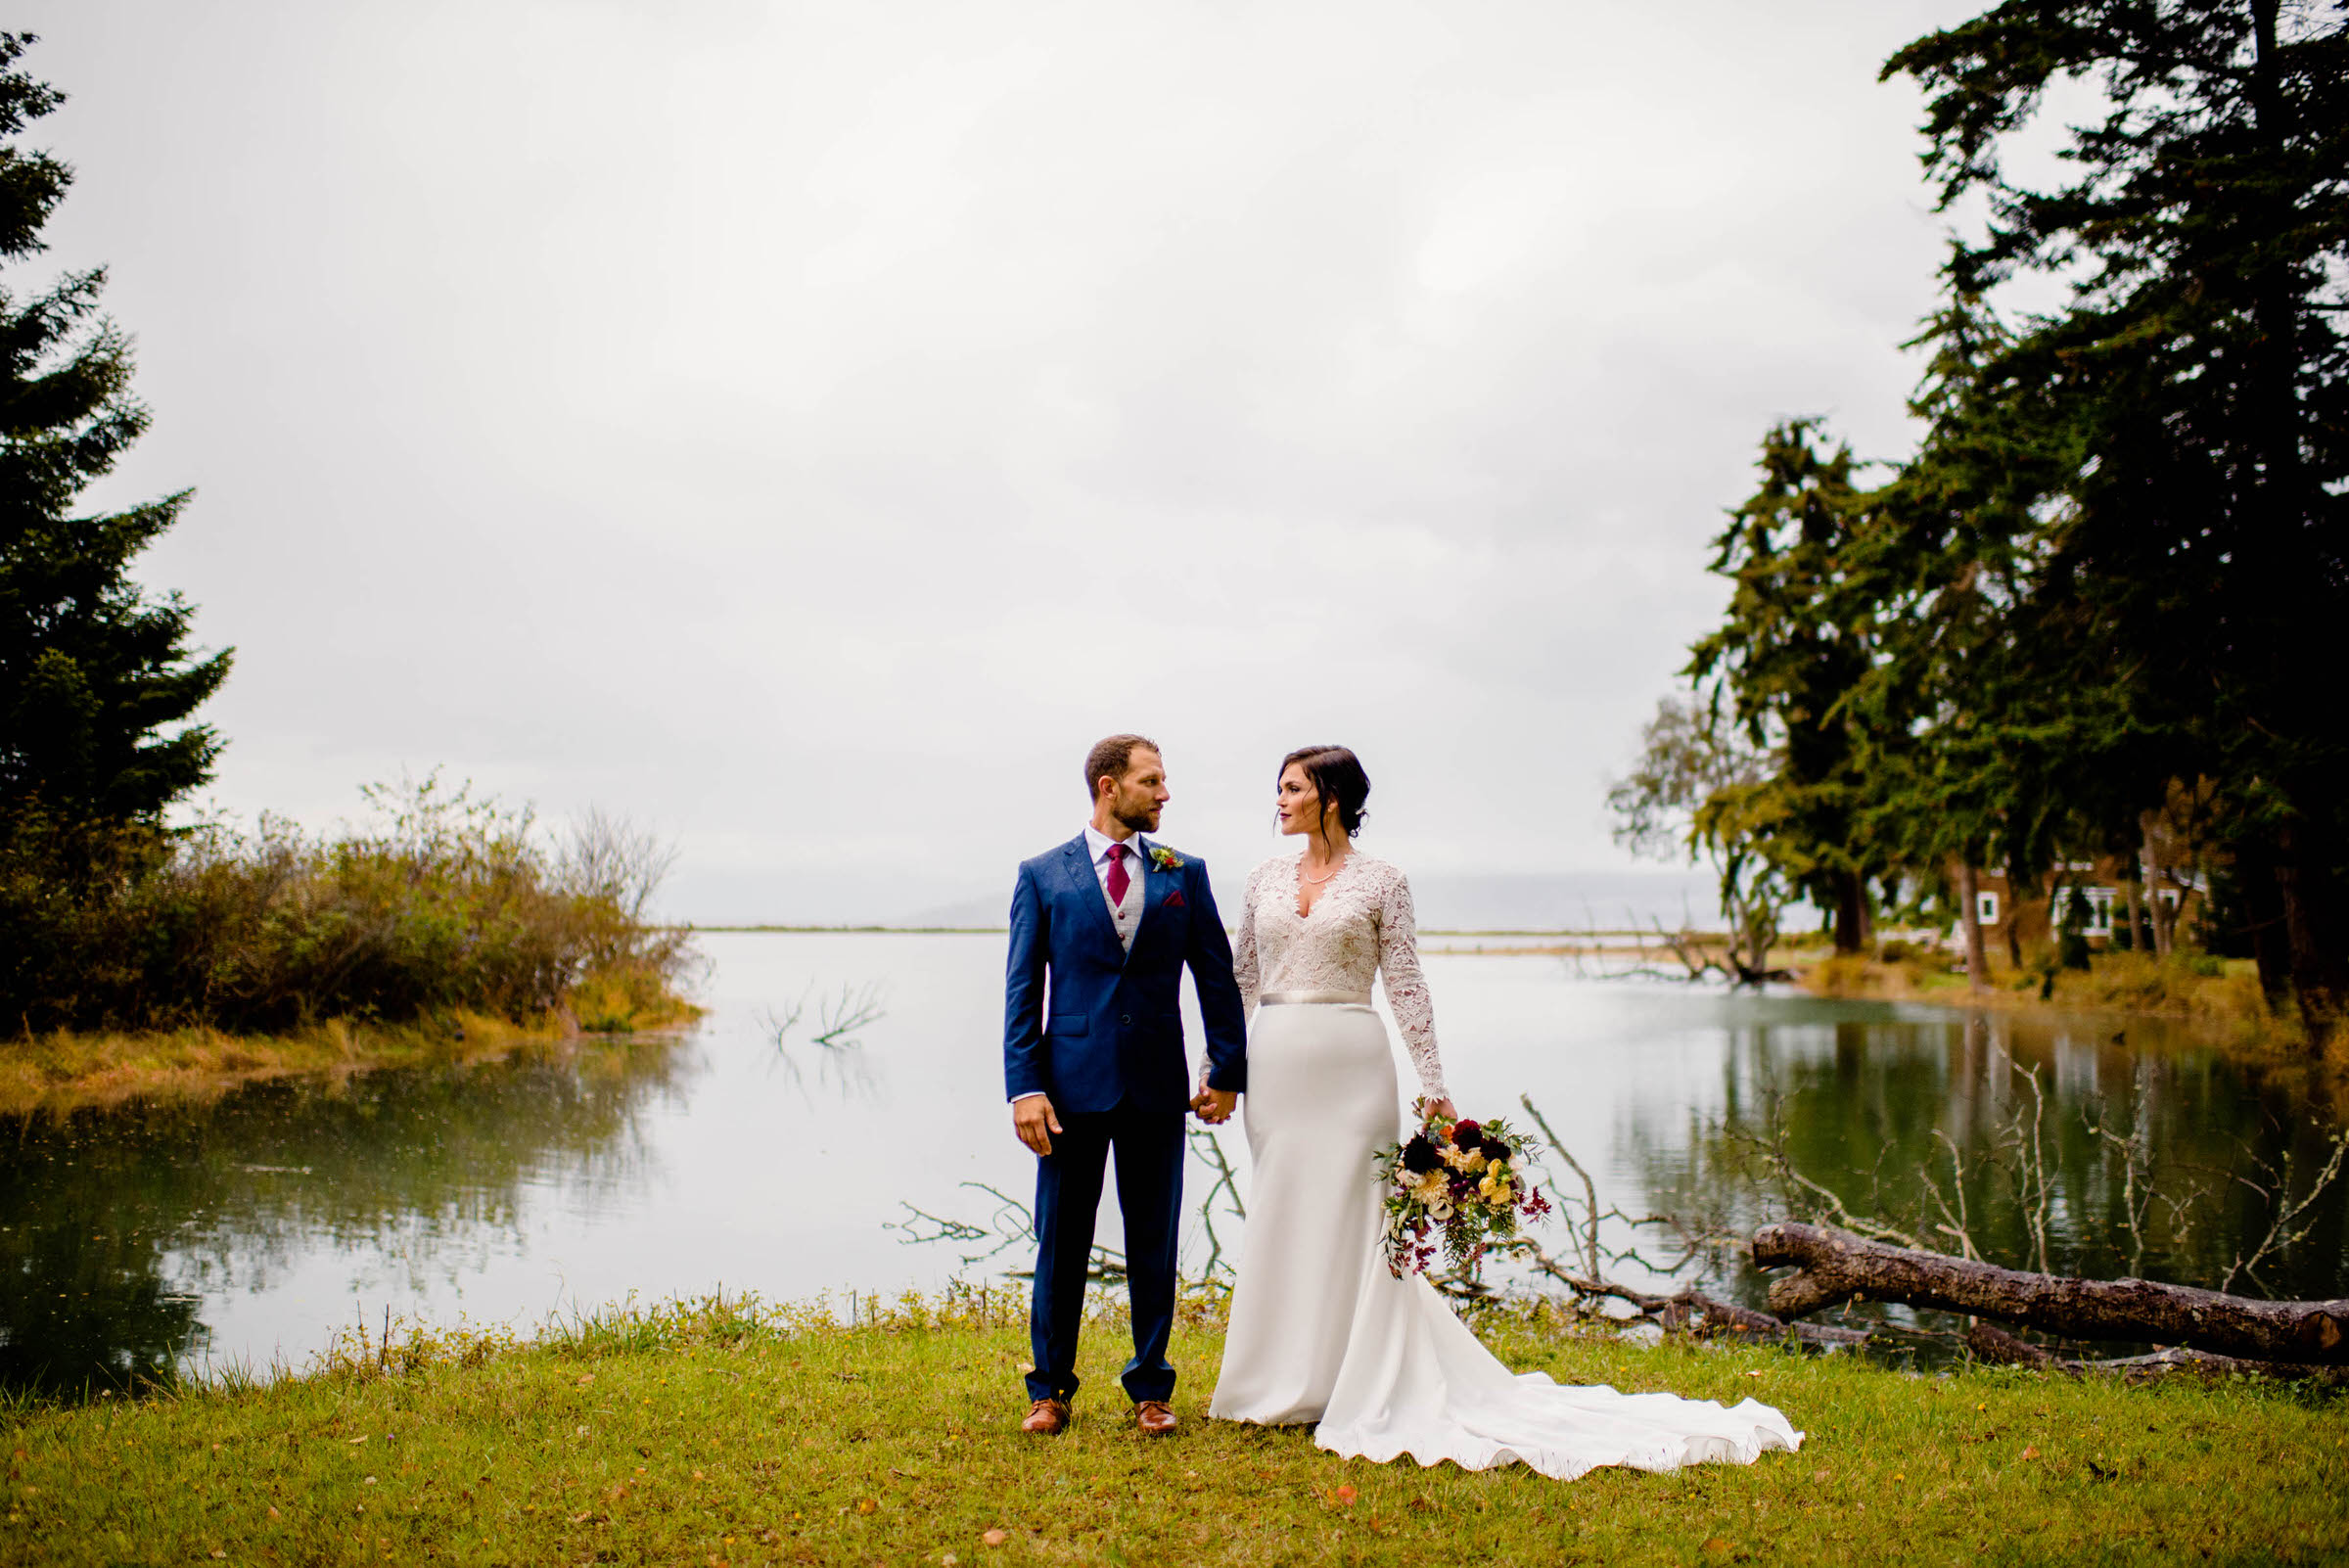 Romantic Whidbey Island weddings: Andrea and Rod (29)